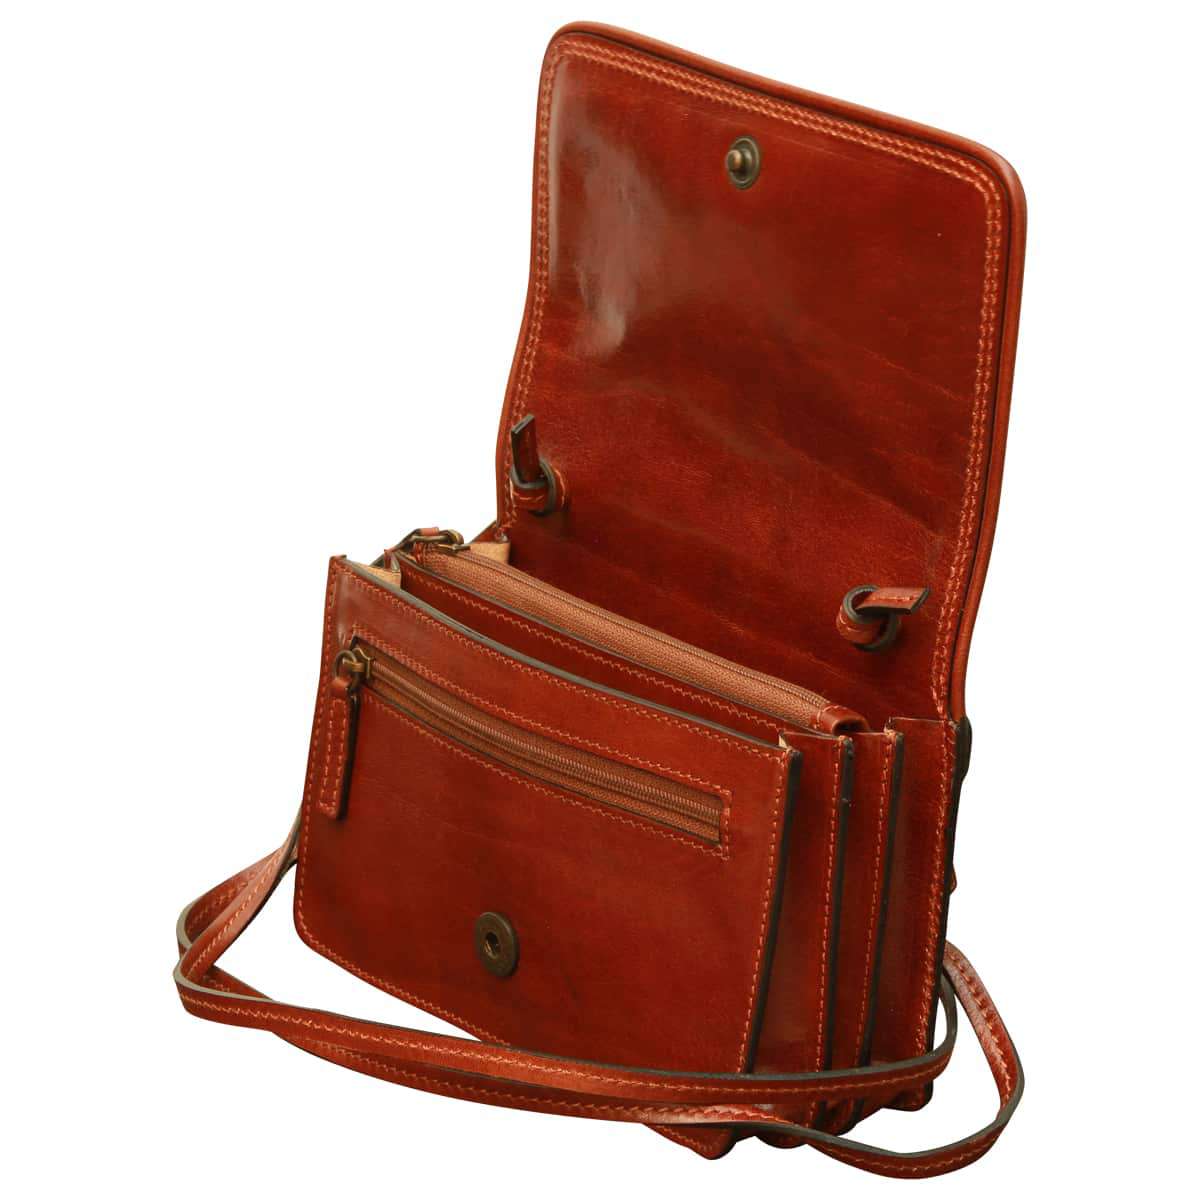 Small leather cross body bag - Brown | 407805MA UK | Old Angler Firenze